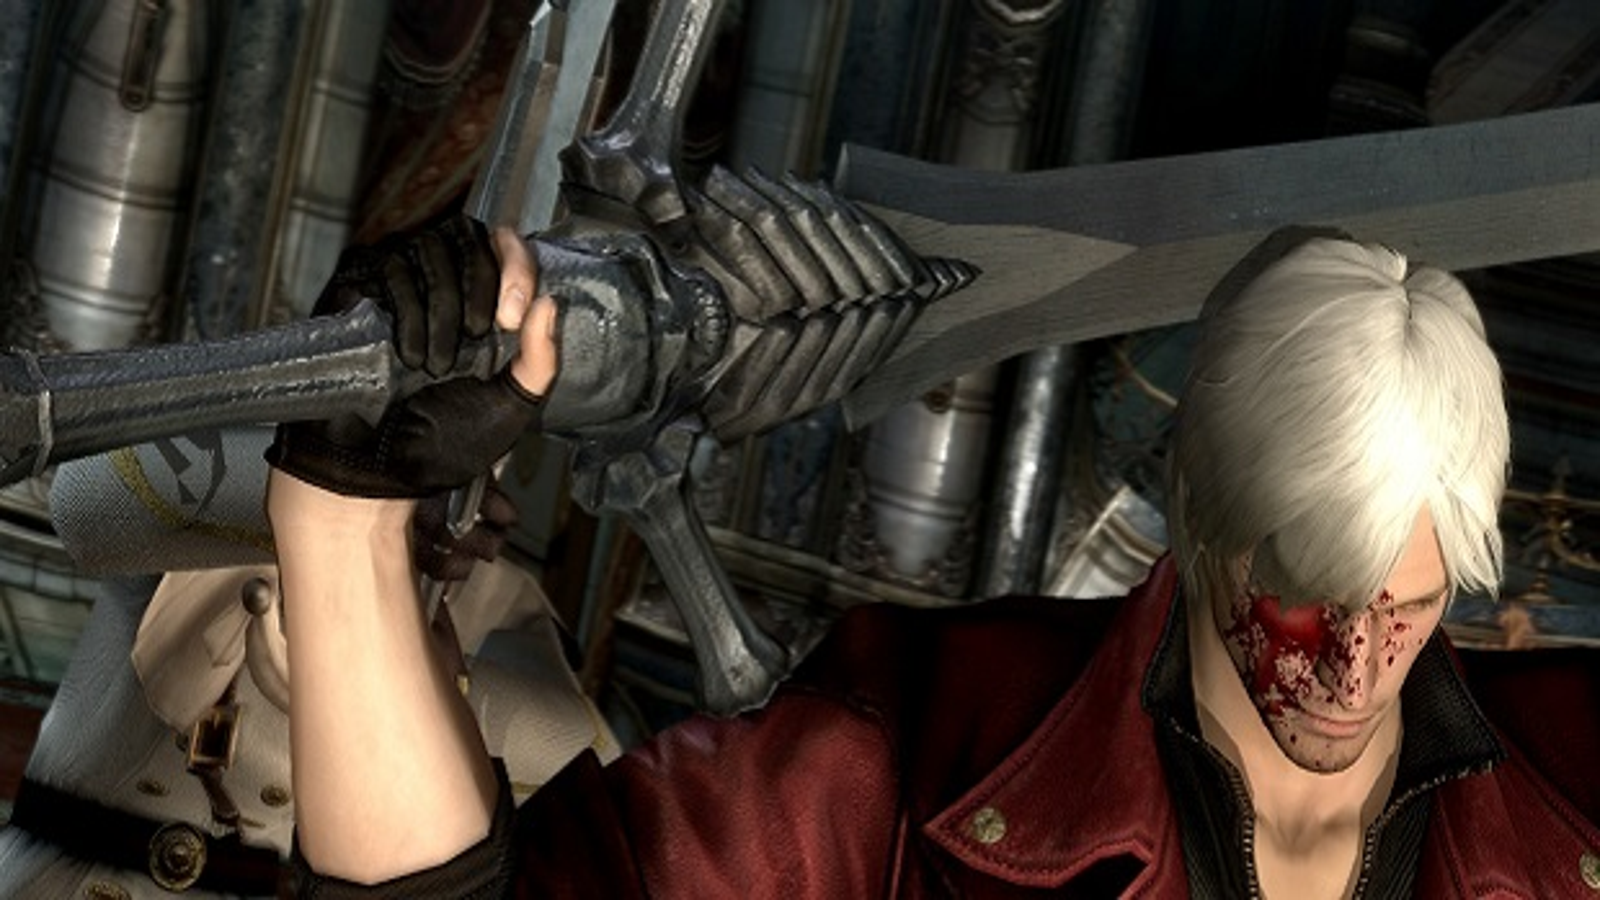 Devil May Cry 4 Special Edition - Vergil Gameplay (DMC4) 